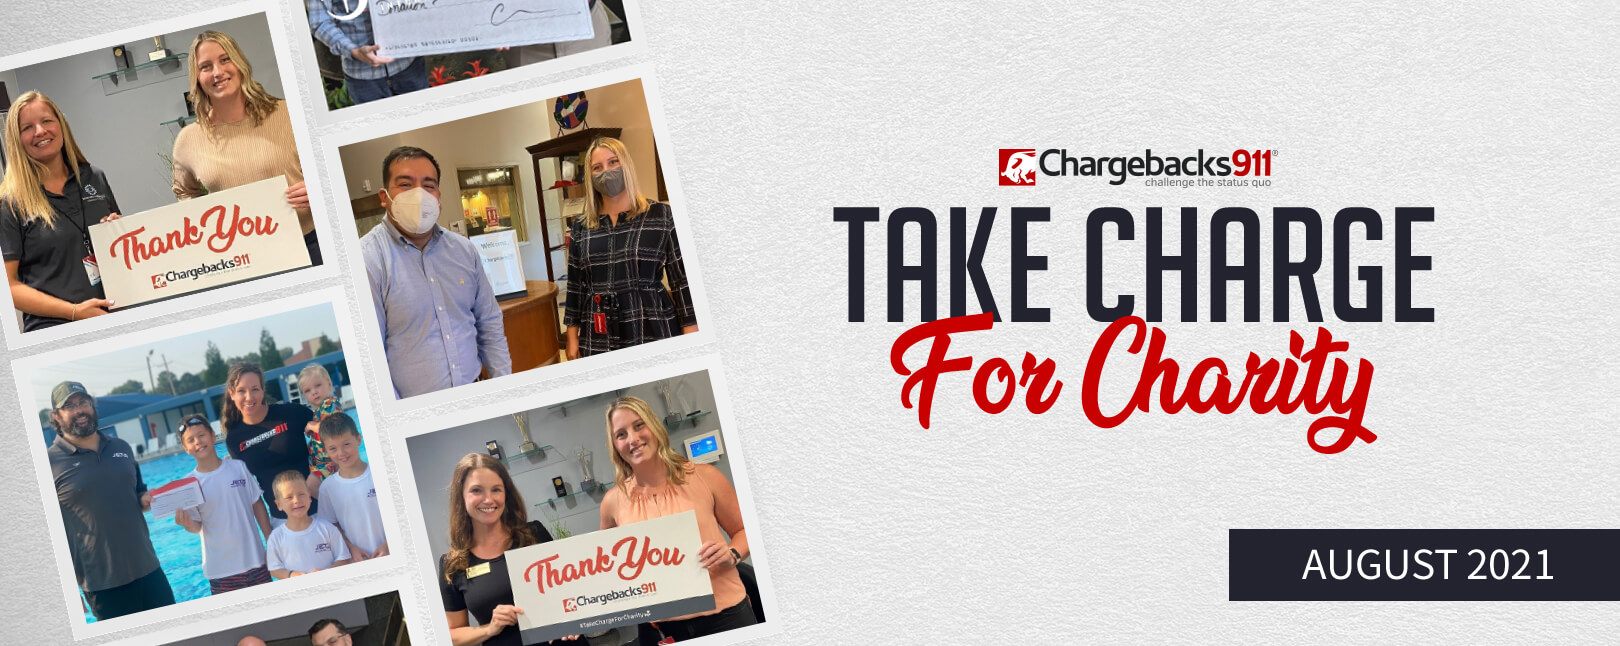 Take Charge for Charity – August 2021